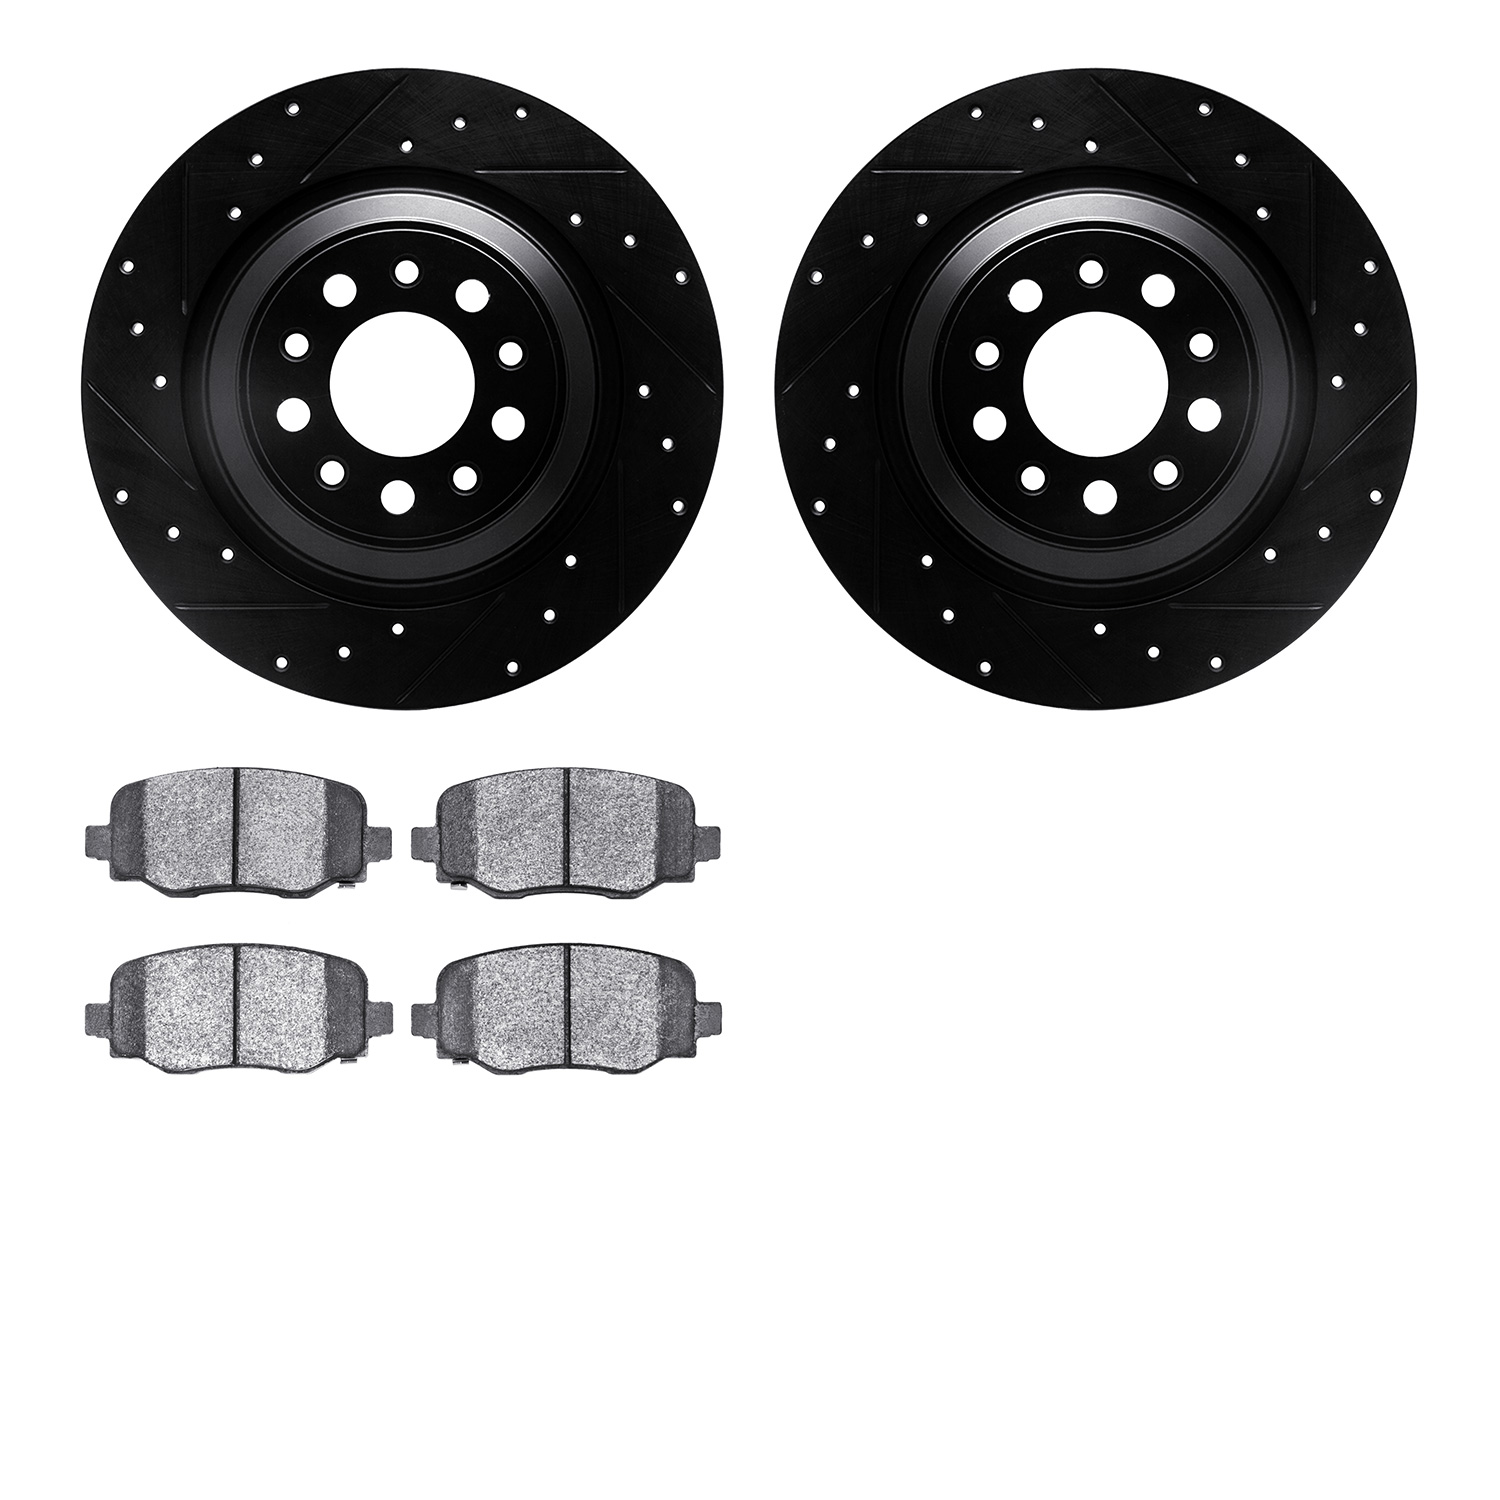 8402-42011 Drilled/Slotted Brake Rotors with Ultimate-Duty Brake Pads Kit [Black], Fits Select Mopar, Position: Rear